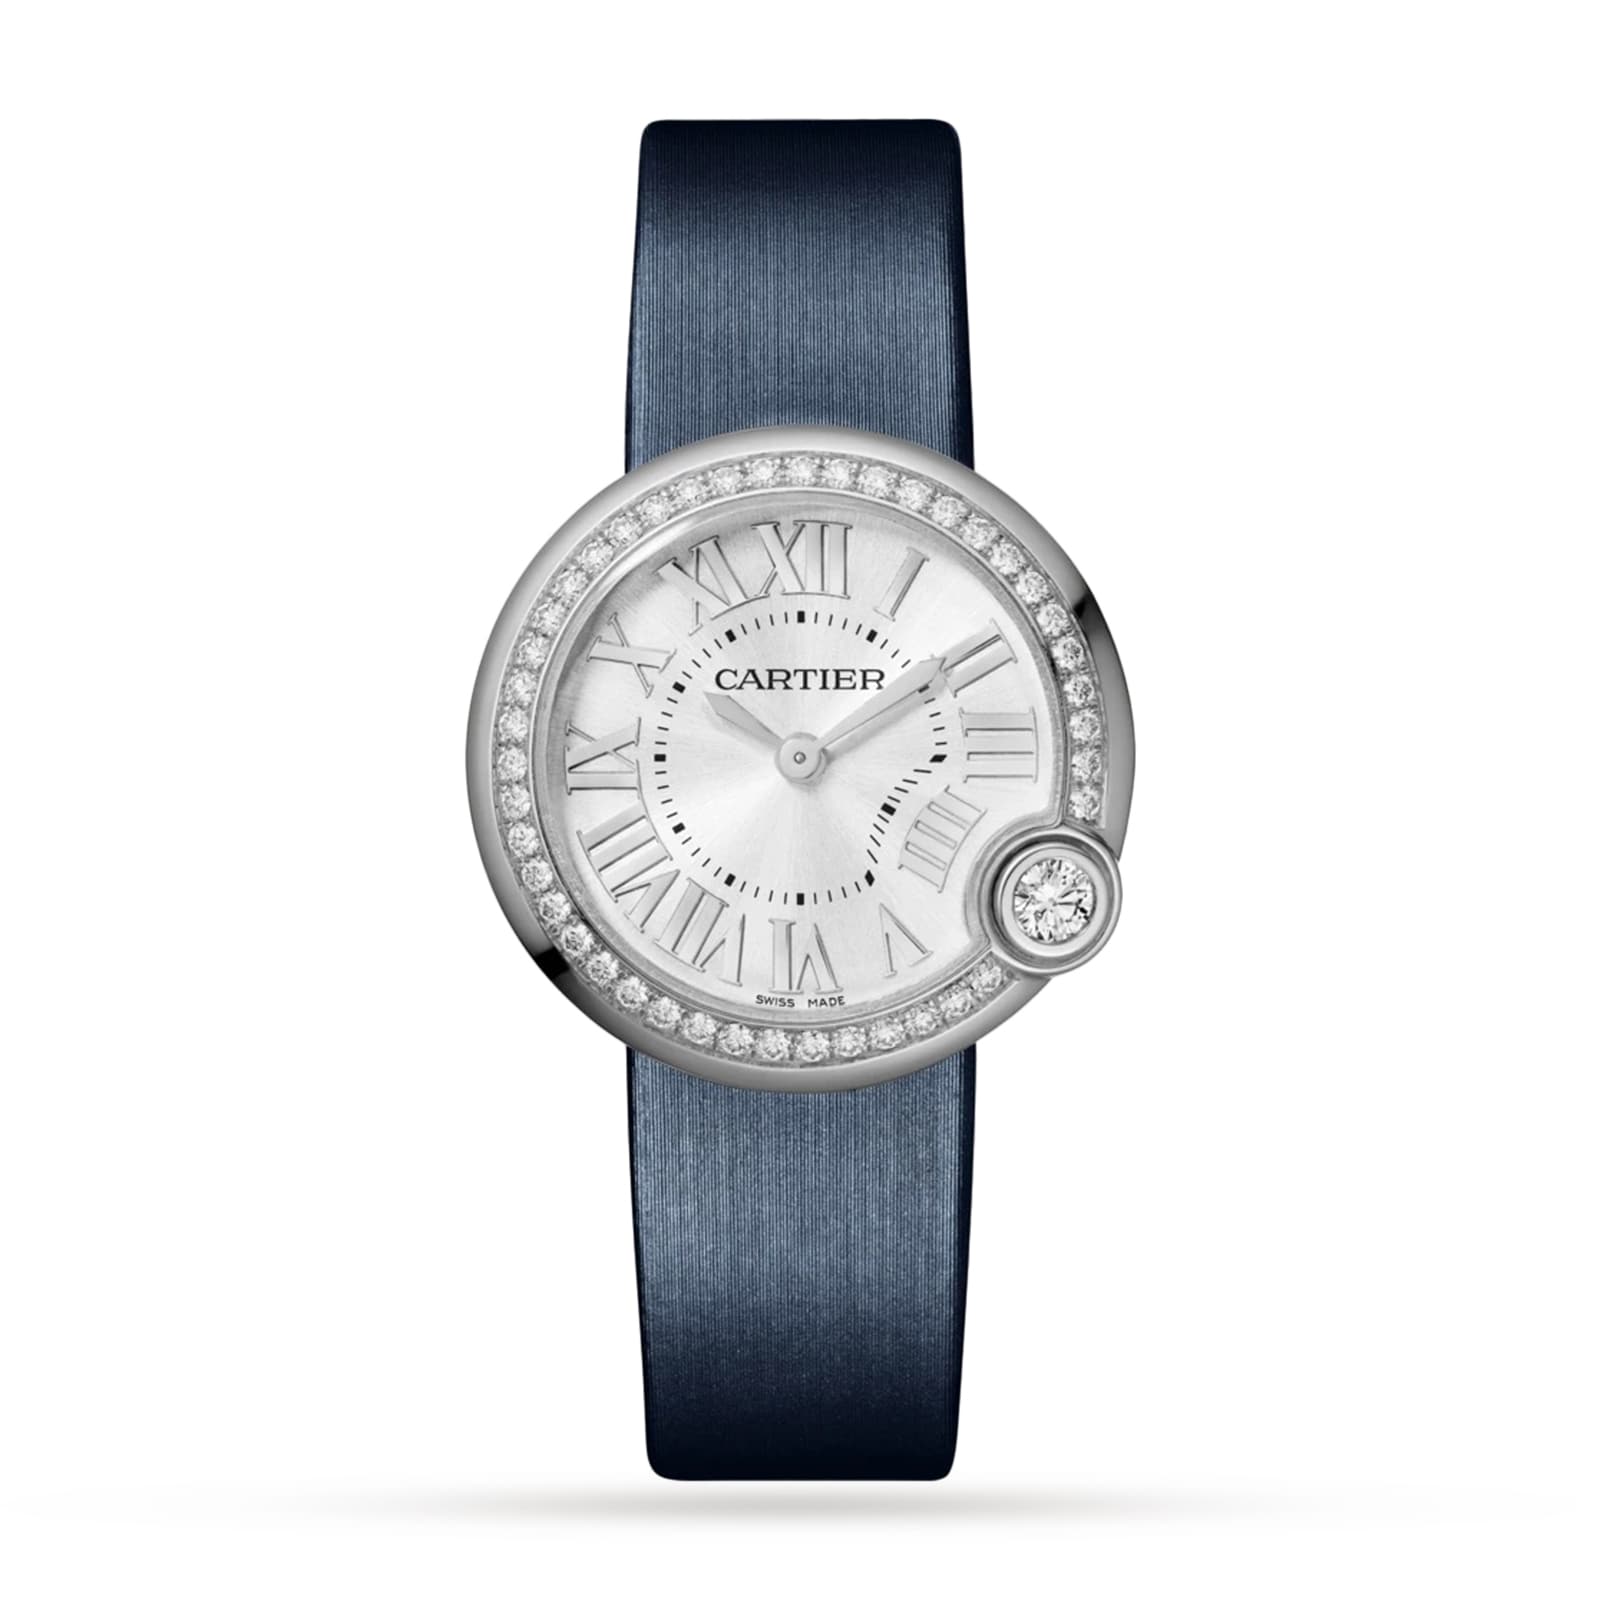 Womens Cartier Watches Ladies Cartier Watches For Sale Cartier Diamond Watches Of Switzerland Us